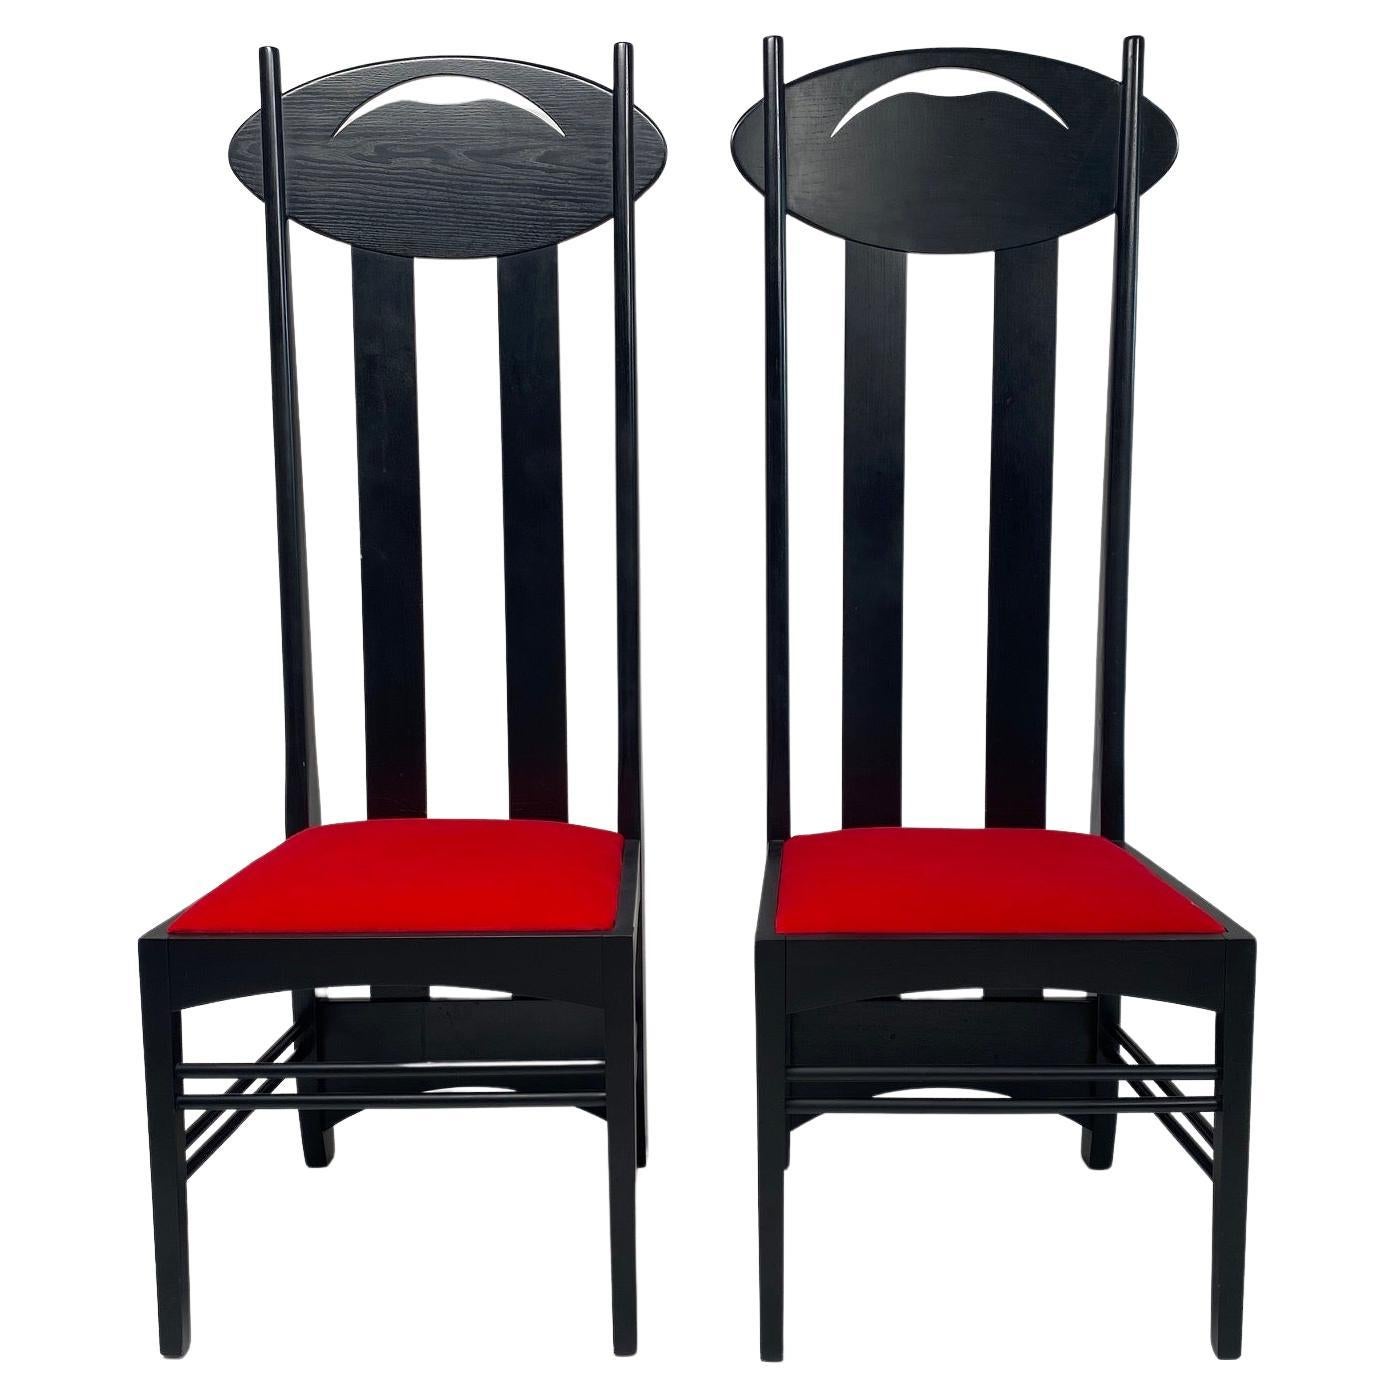 Set of 2 Argyle Chairs by Charles R Mackintosh for Atelier International For Sale